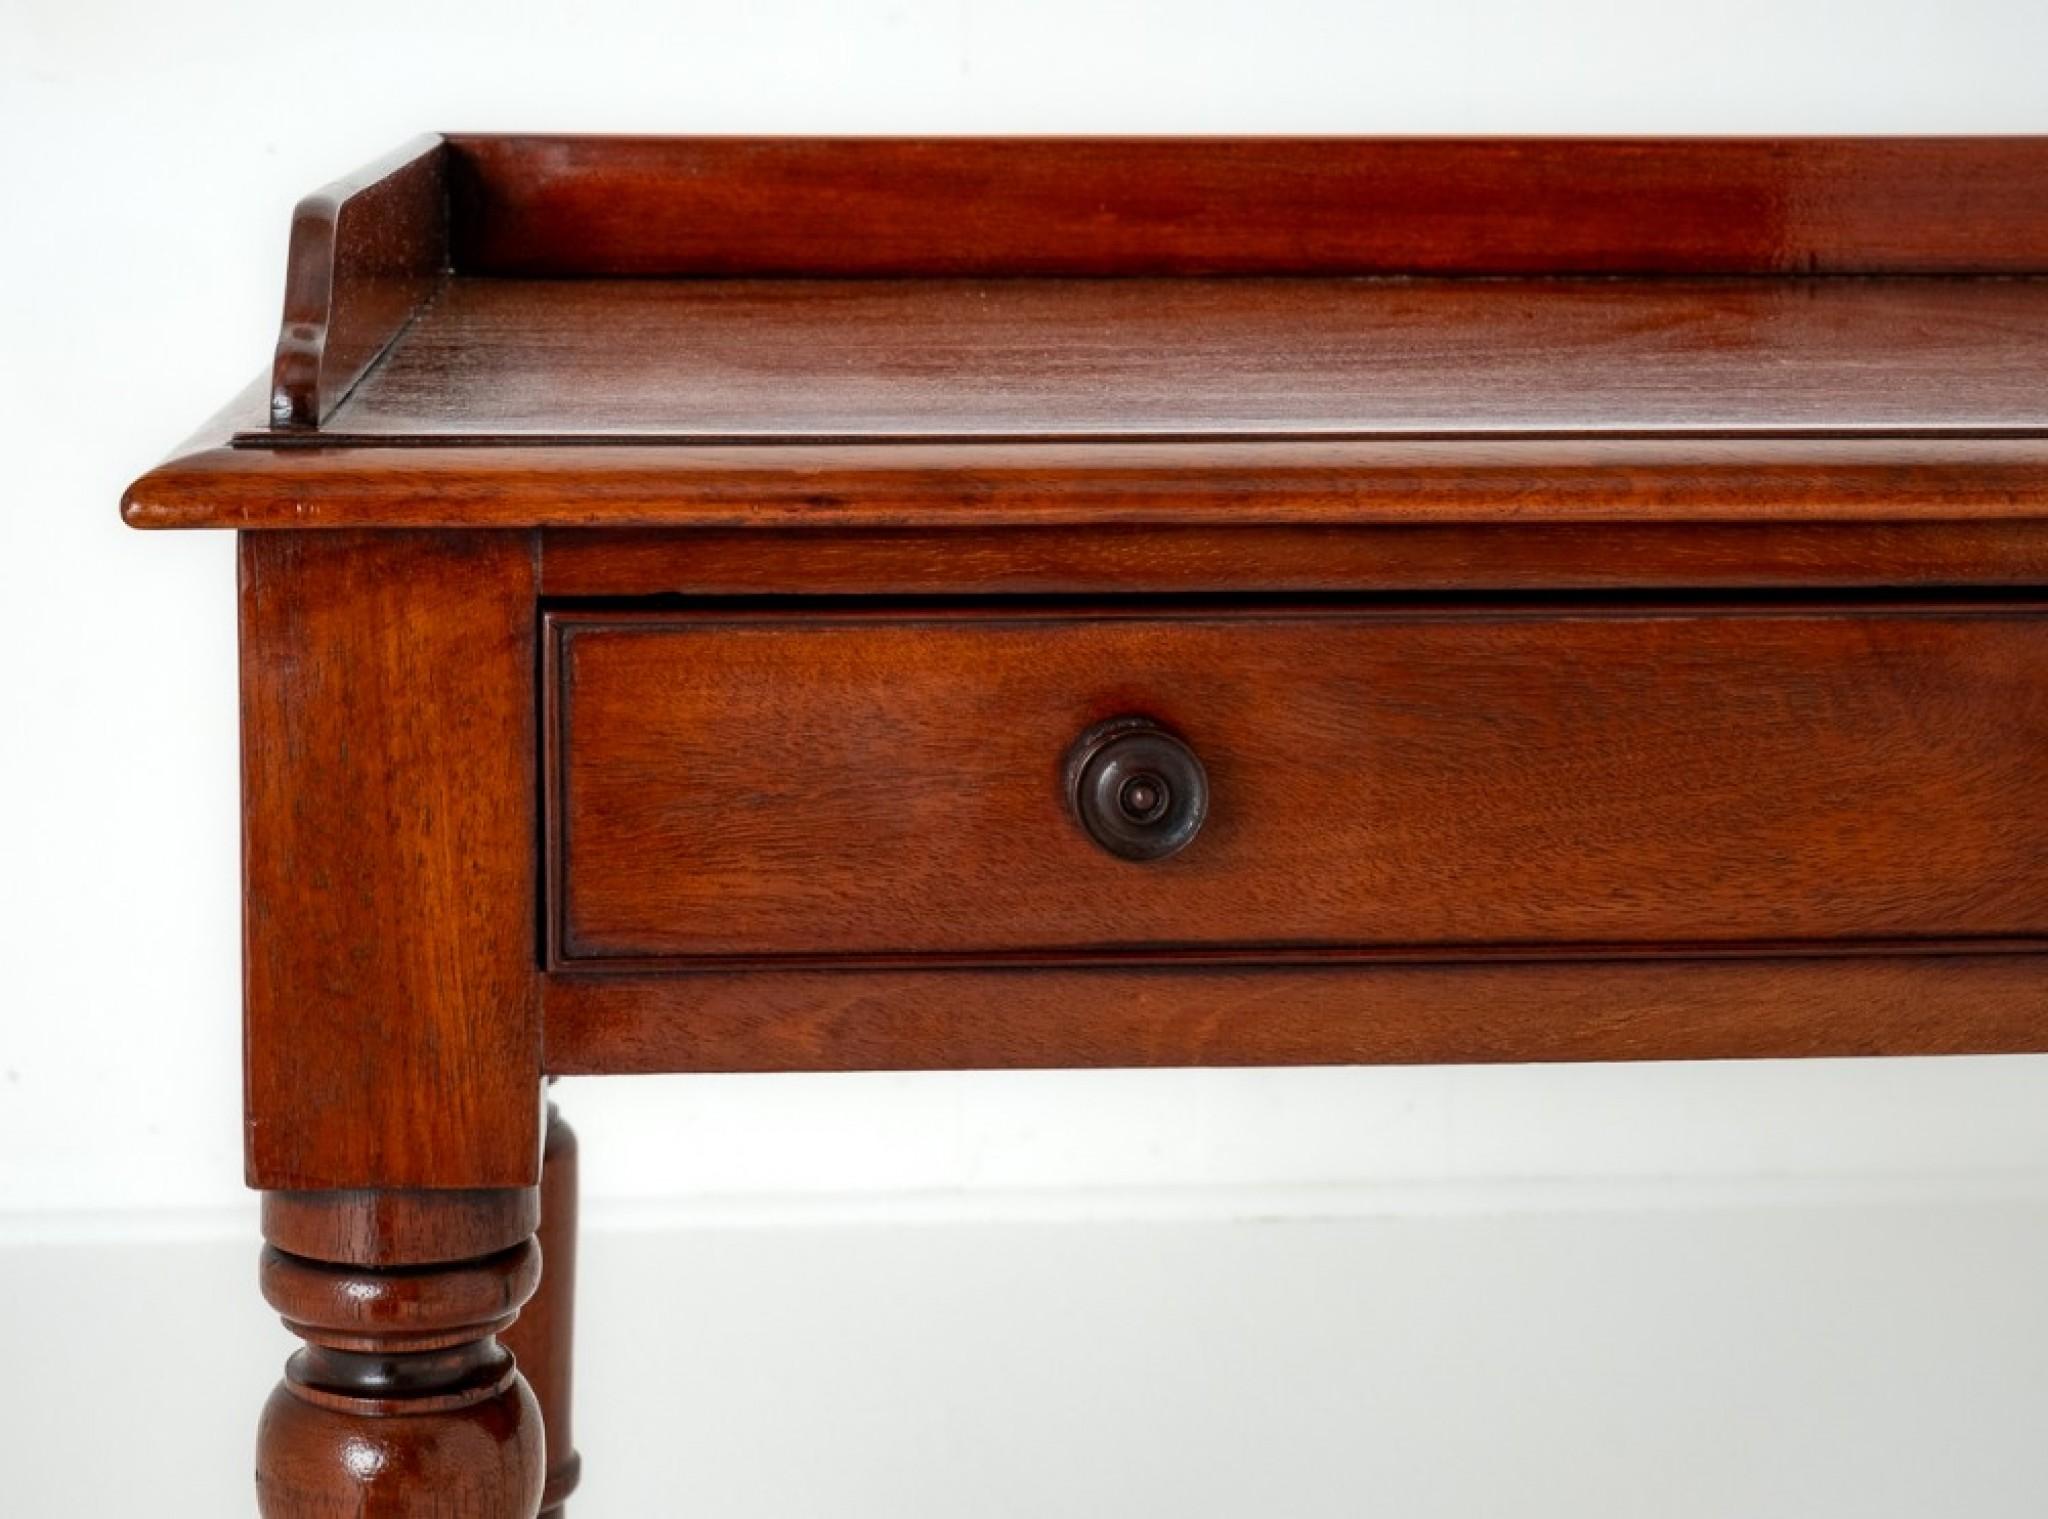 Victorian Mahogany Tray Top Side Table.
This Side Table is Raised upon Crisply Ring Turned Legs. Circa 1860
Featuring 2 Mahogany Lined Drawers With Ring Turned Knobs.
The Top of the Side Table Having a Small Raised Gallery.
Presented in good